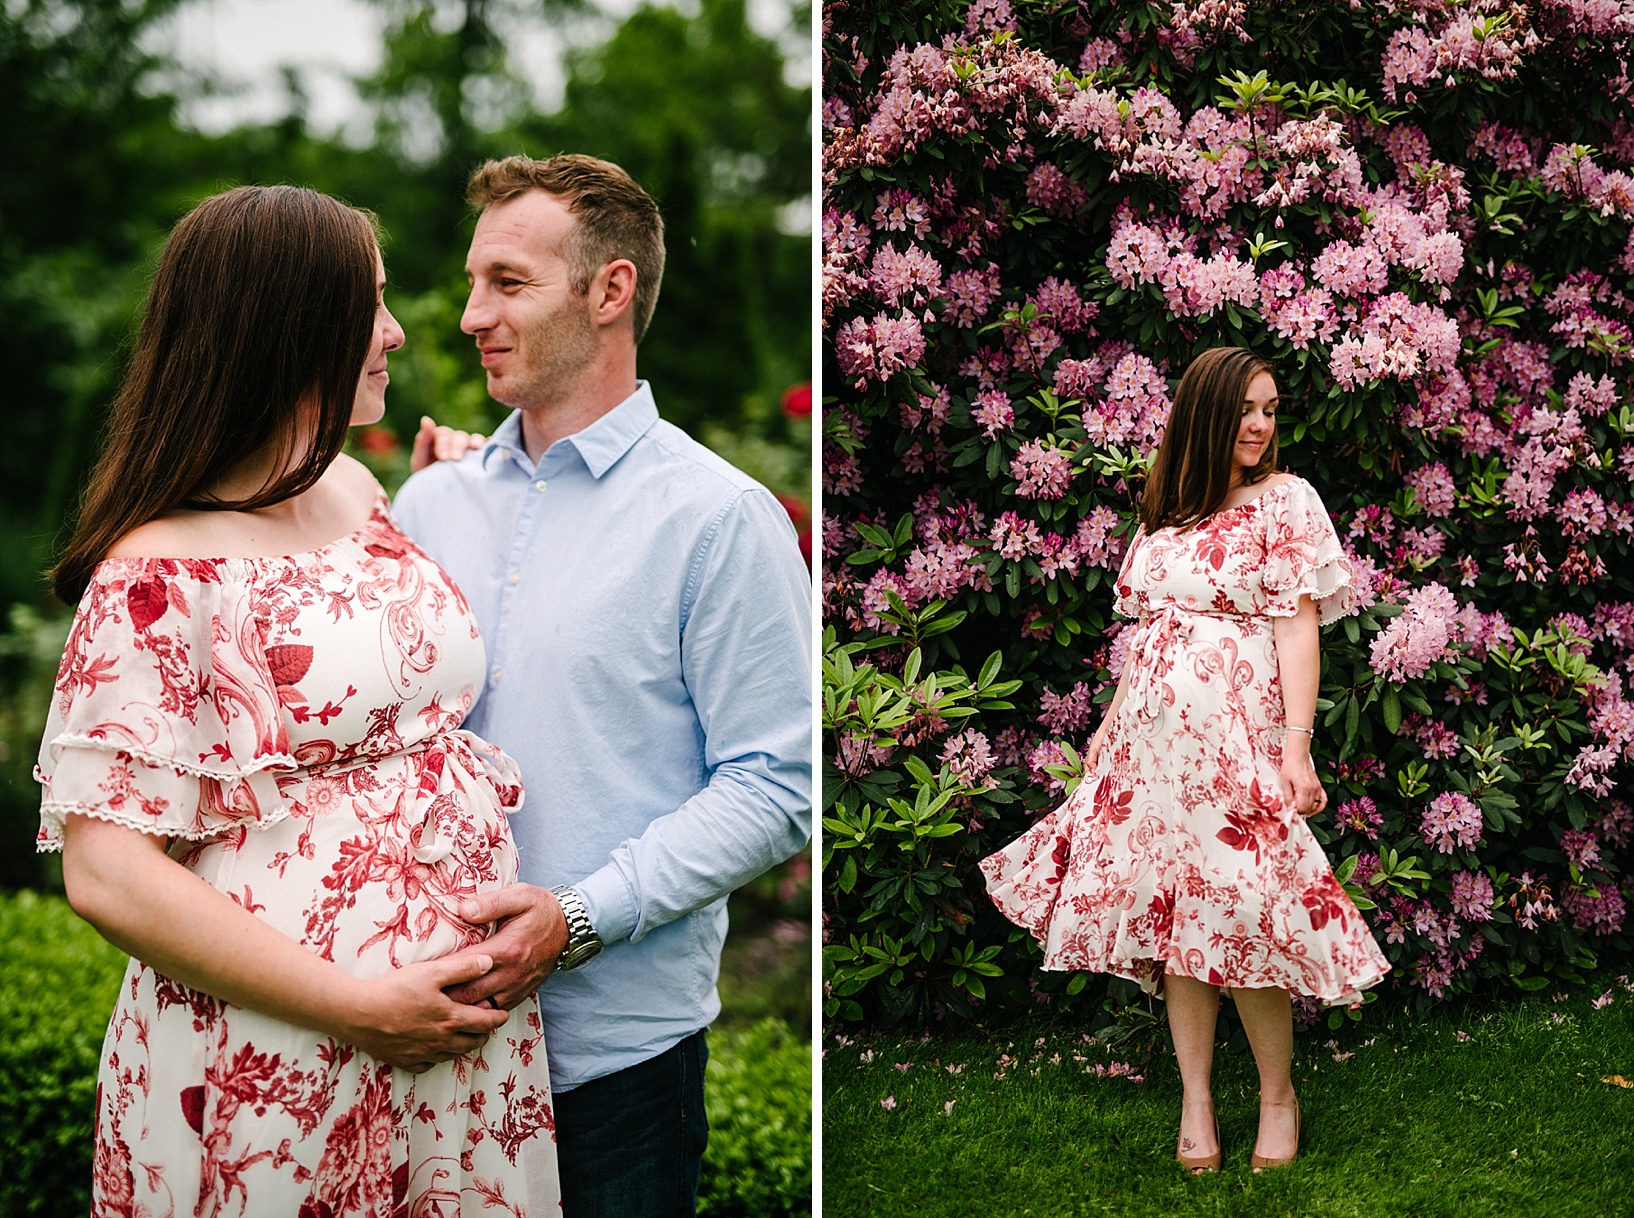 Pregnant brunette woman spins her white and red floral dress in front of a giant bush of pink flowers during rainy maternity session